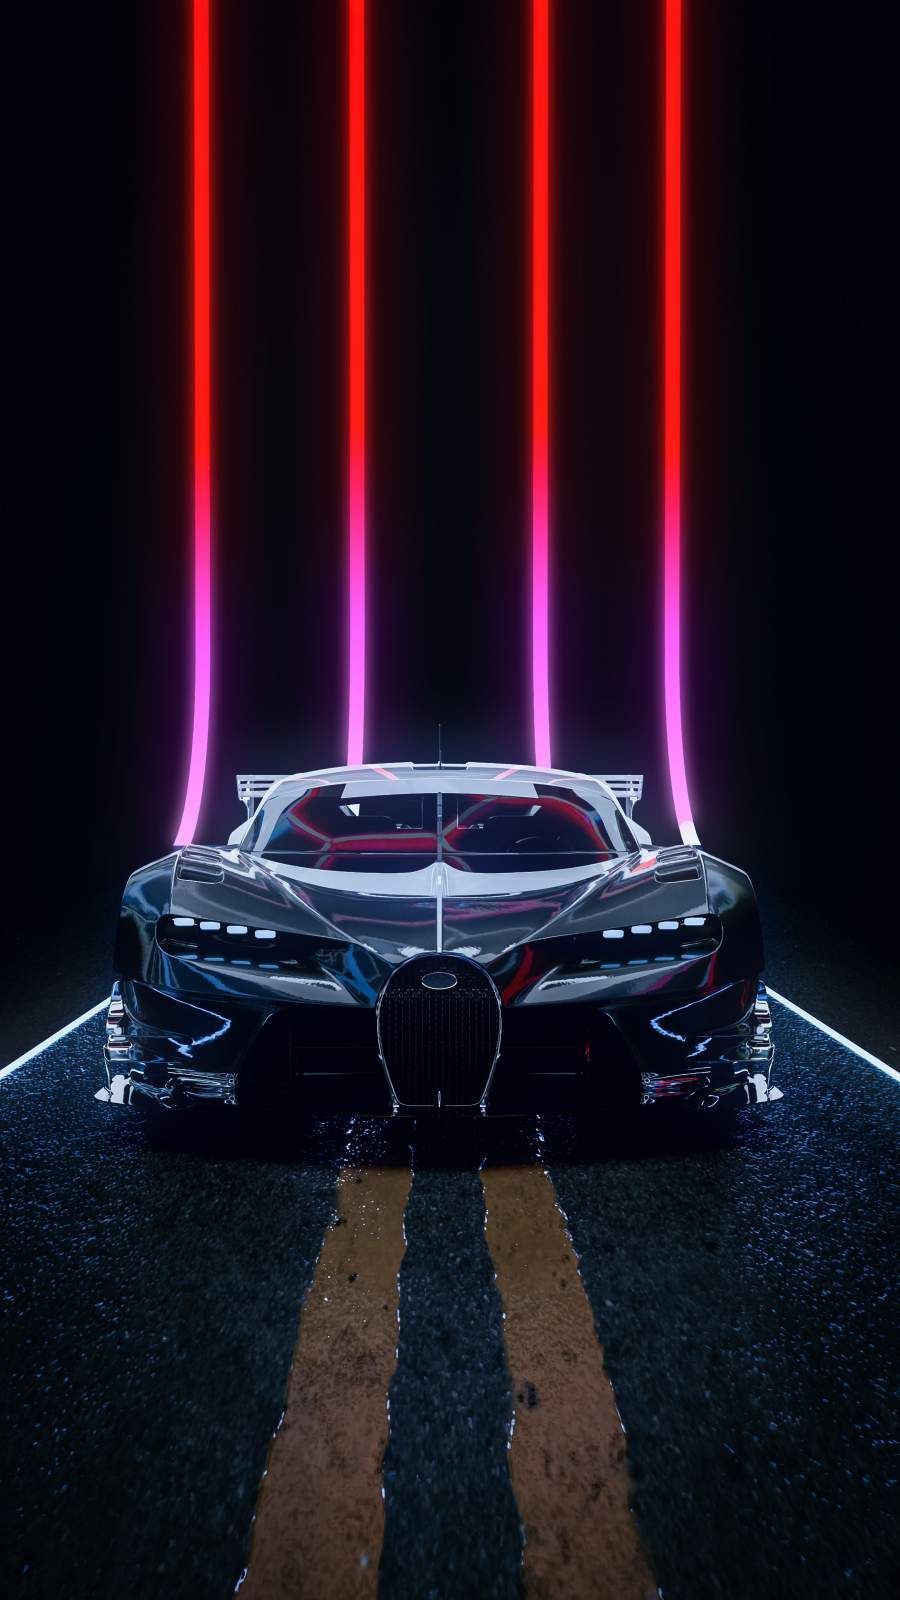 iPhone Wallpaper for iPhone iPhone iPhone X, iPhone XR, iPhone 8 Plus High Quality Wallpaper, iPad Backgrou. Bugatti wallpaper, Bugatti, Car wallpaper